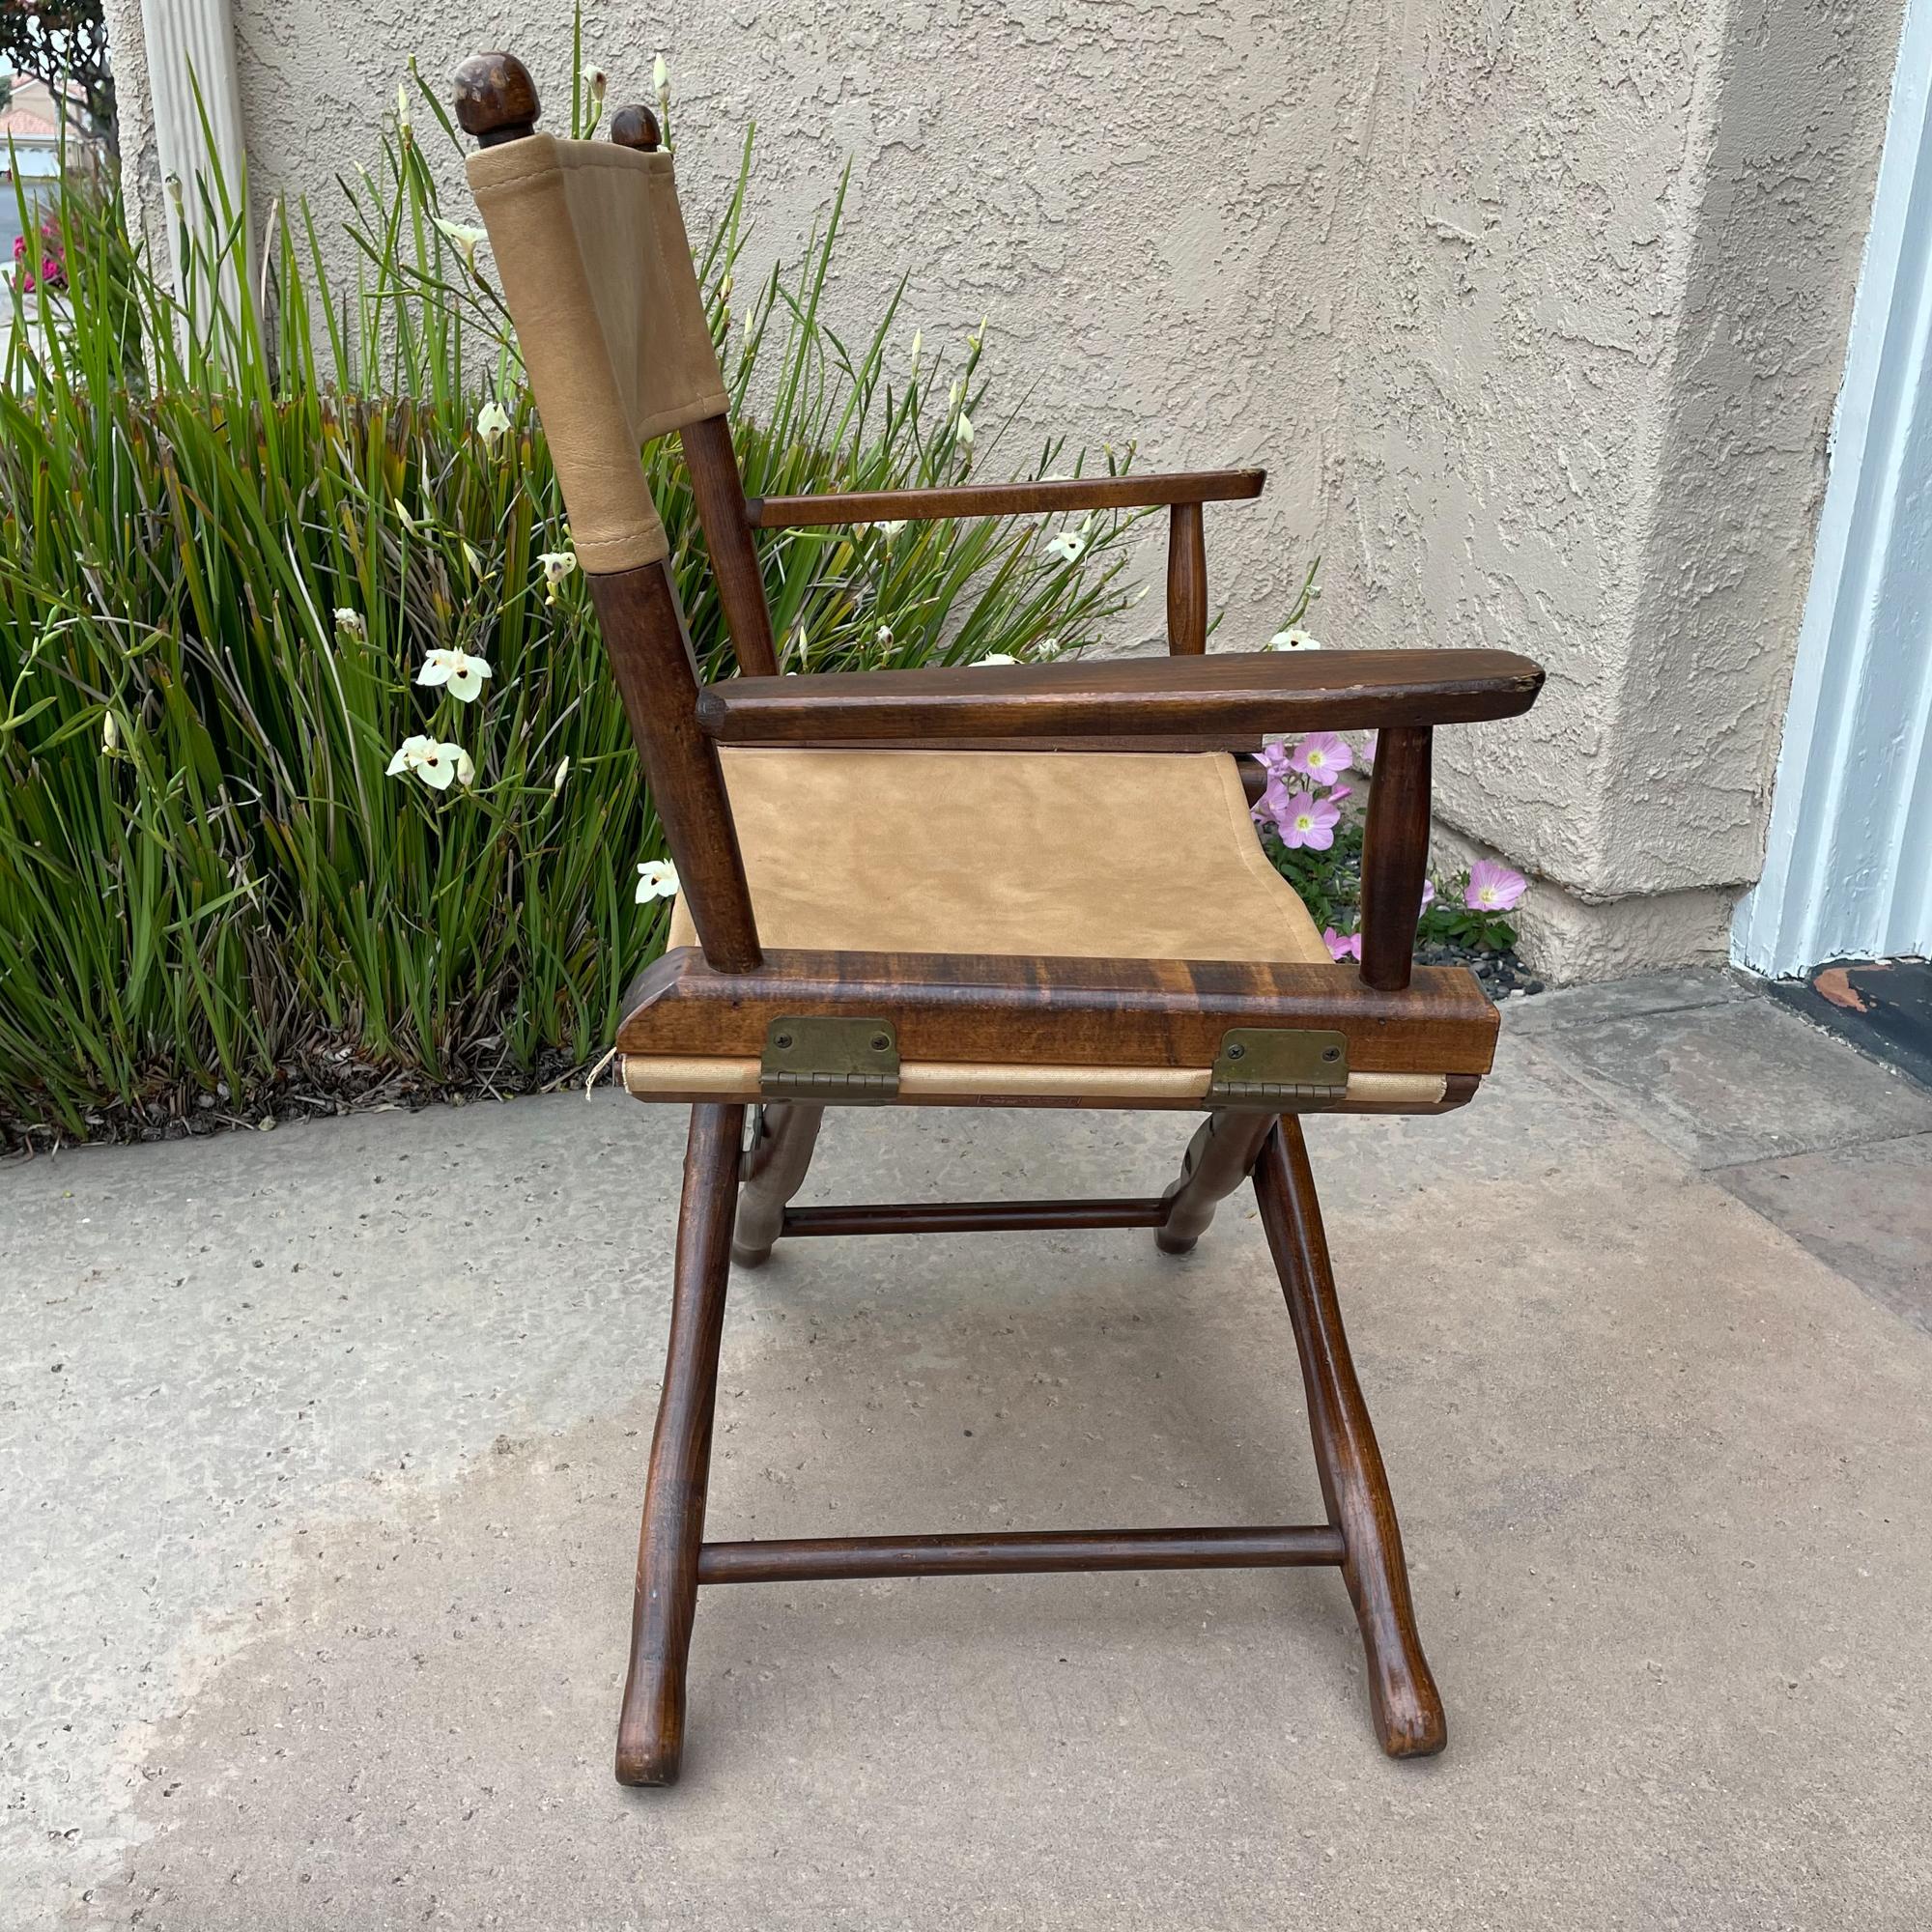 1960s DIRECTORS Chair Gold Medal Camp Folding Furniture Racine WI 2